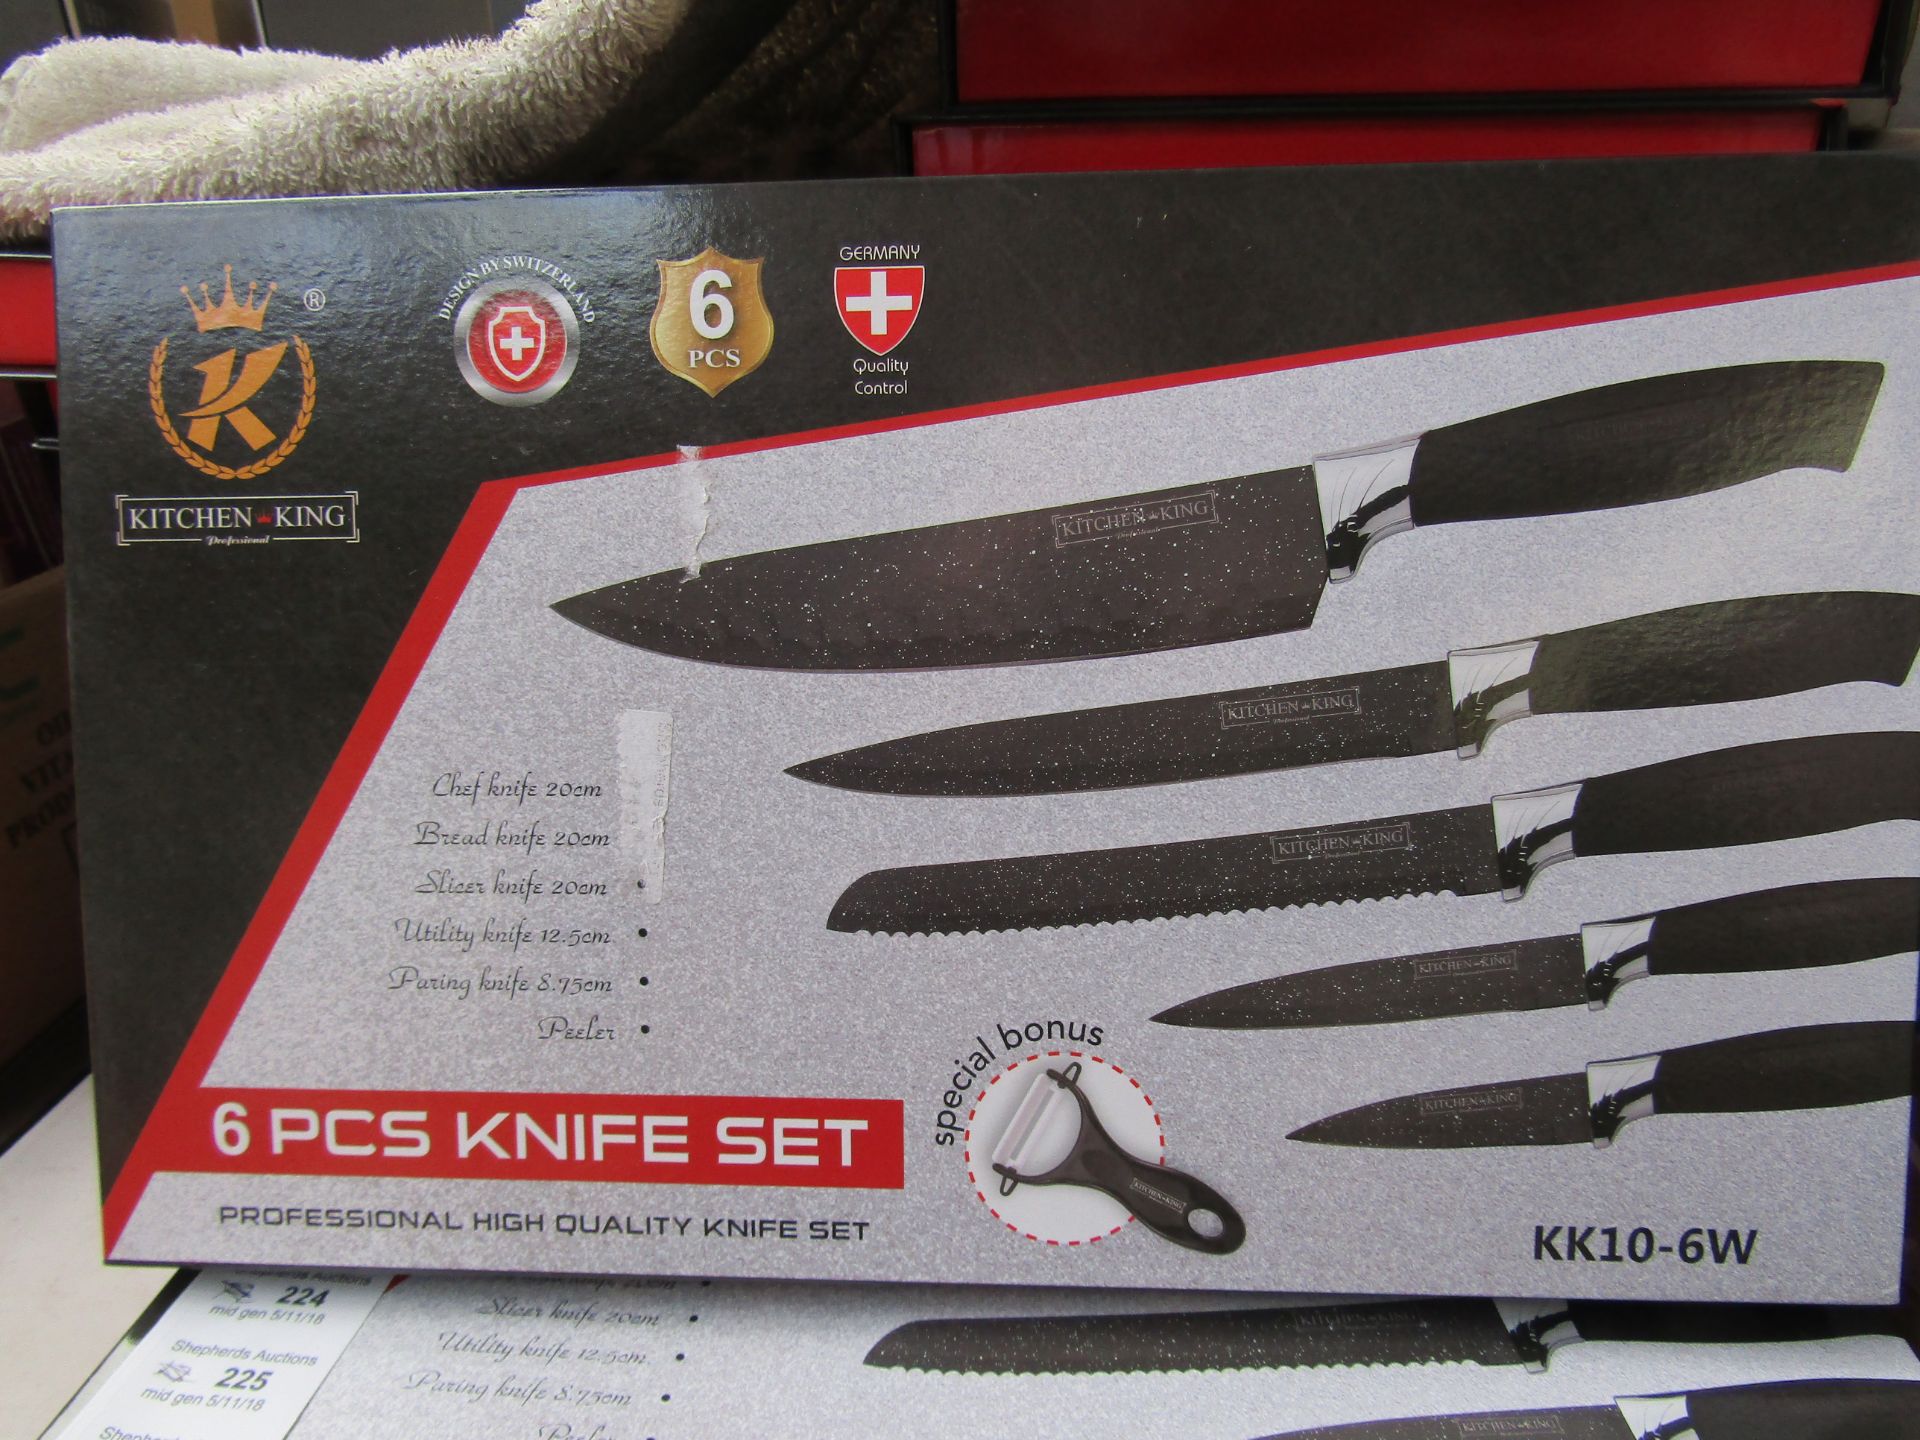 Kitchen King set of 5x knives and 1x peeler tool, all new